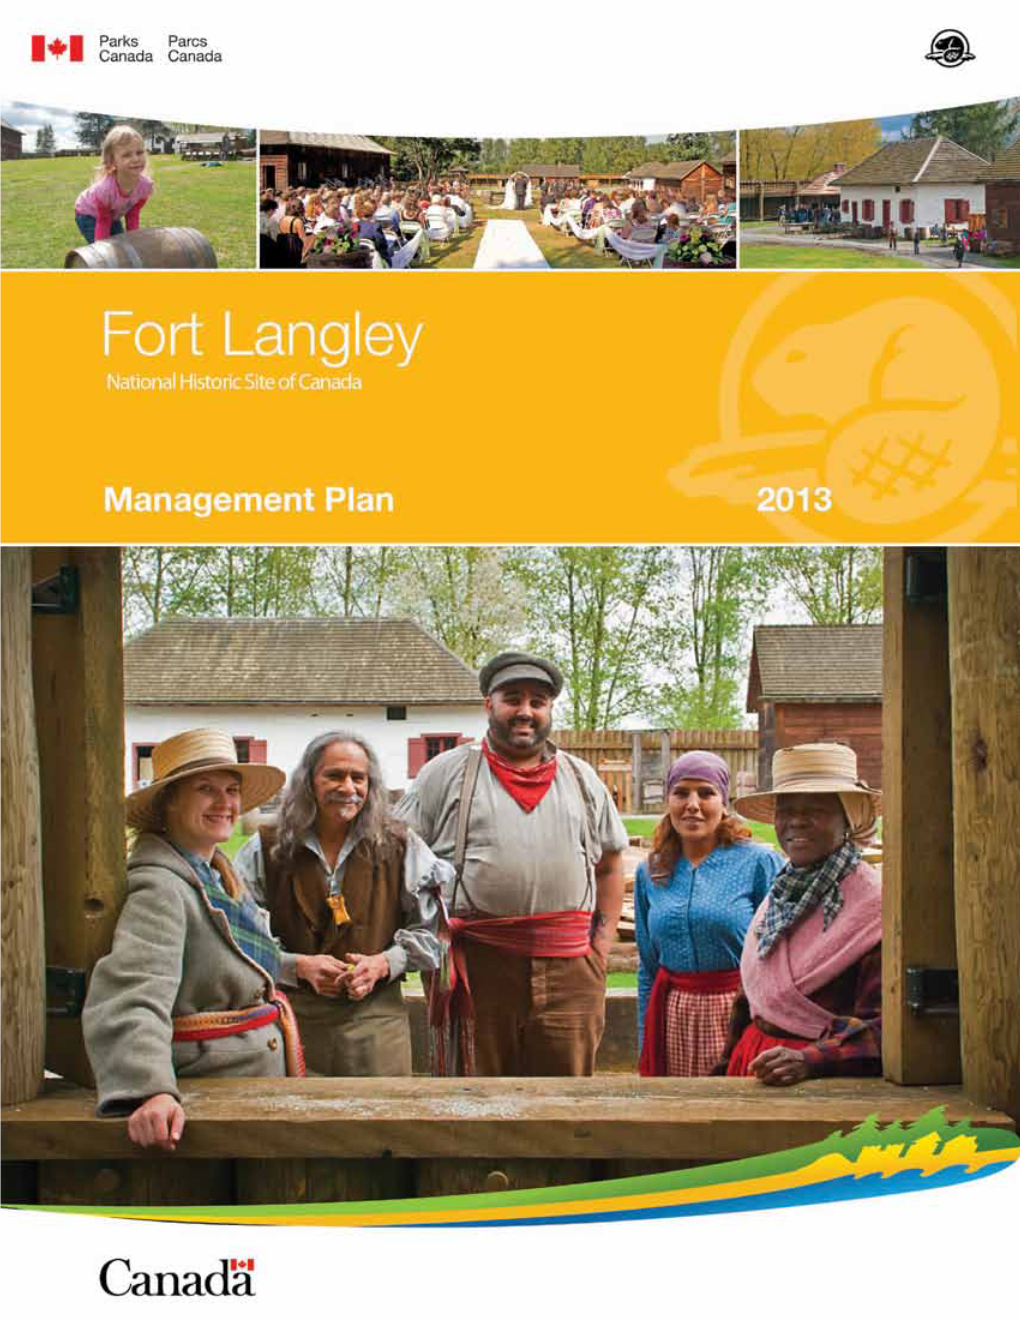 Fort Langley National Historic Sites of Canada